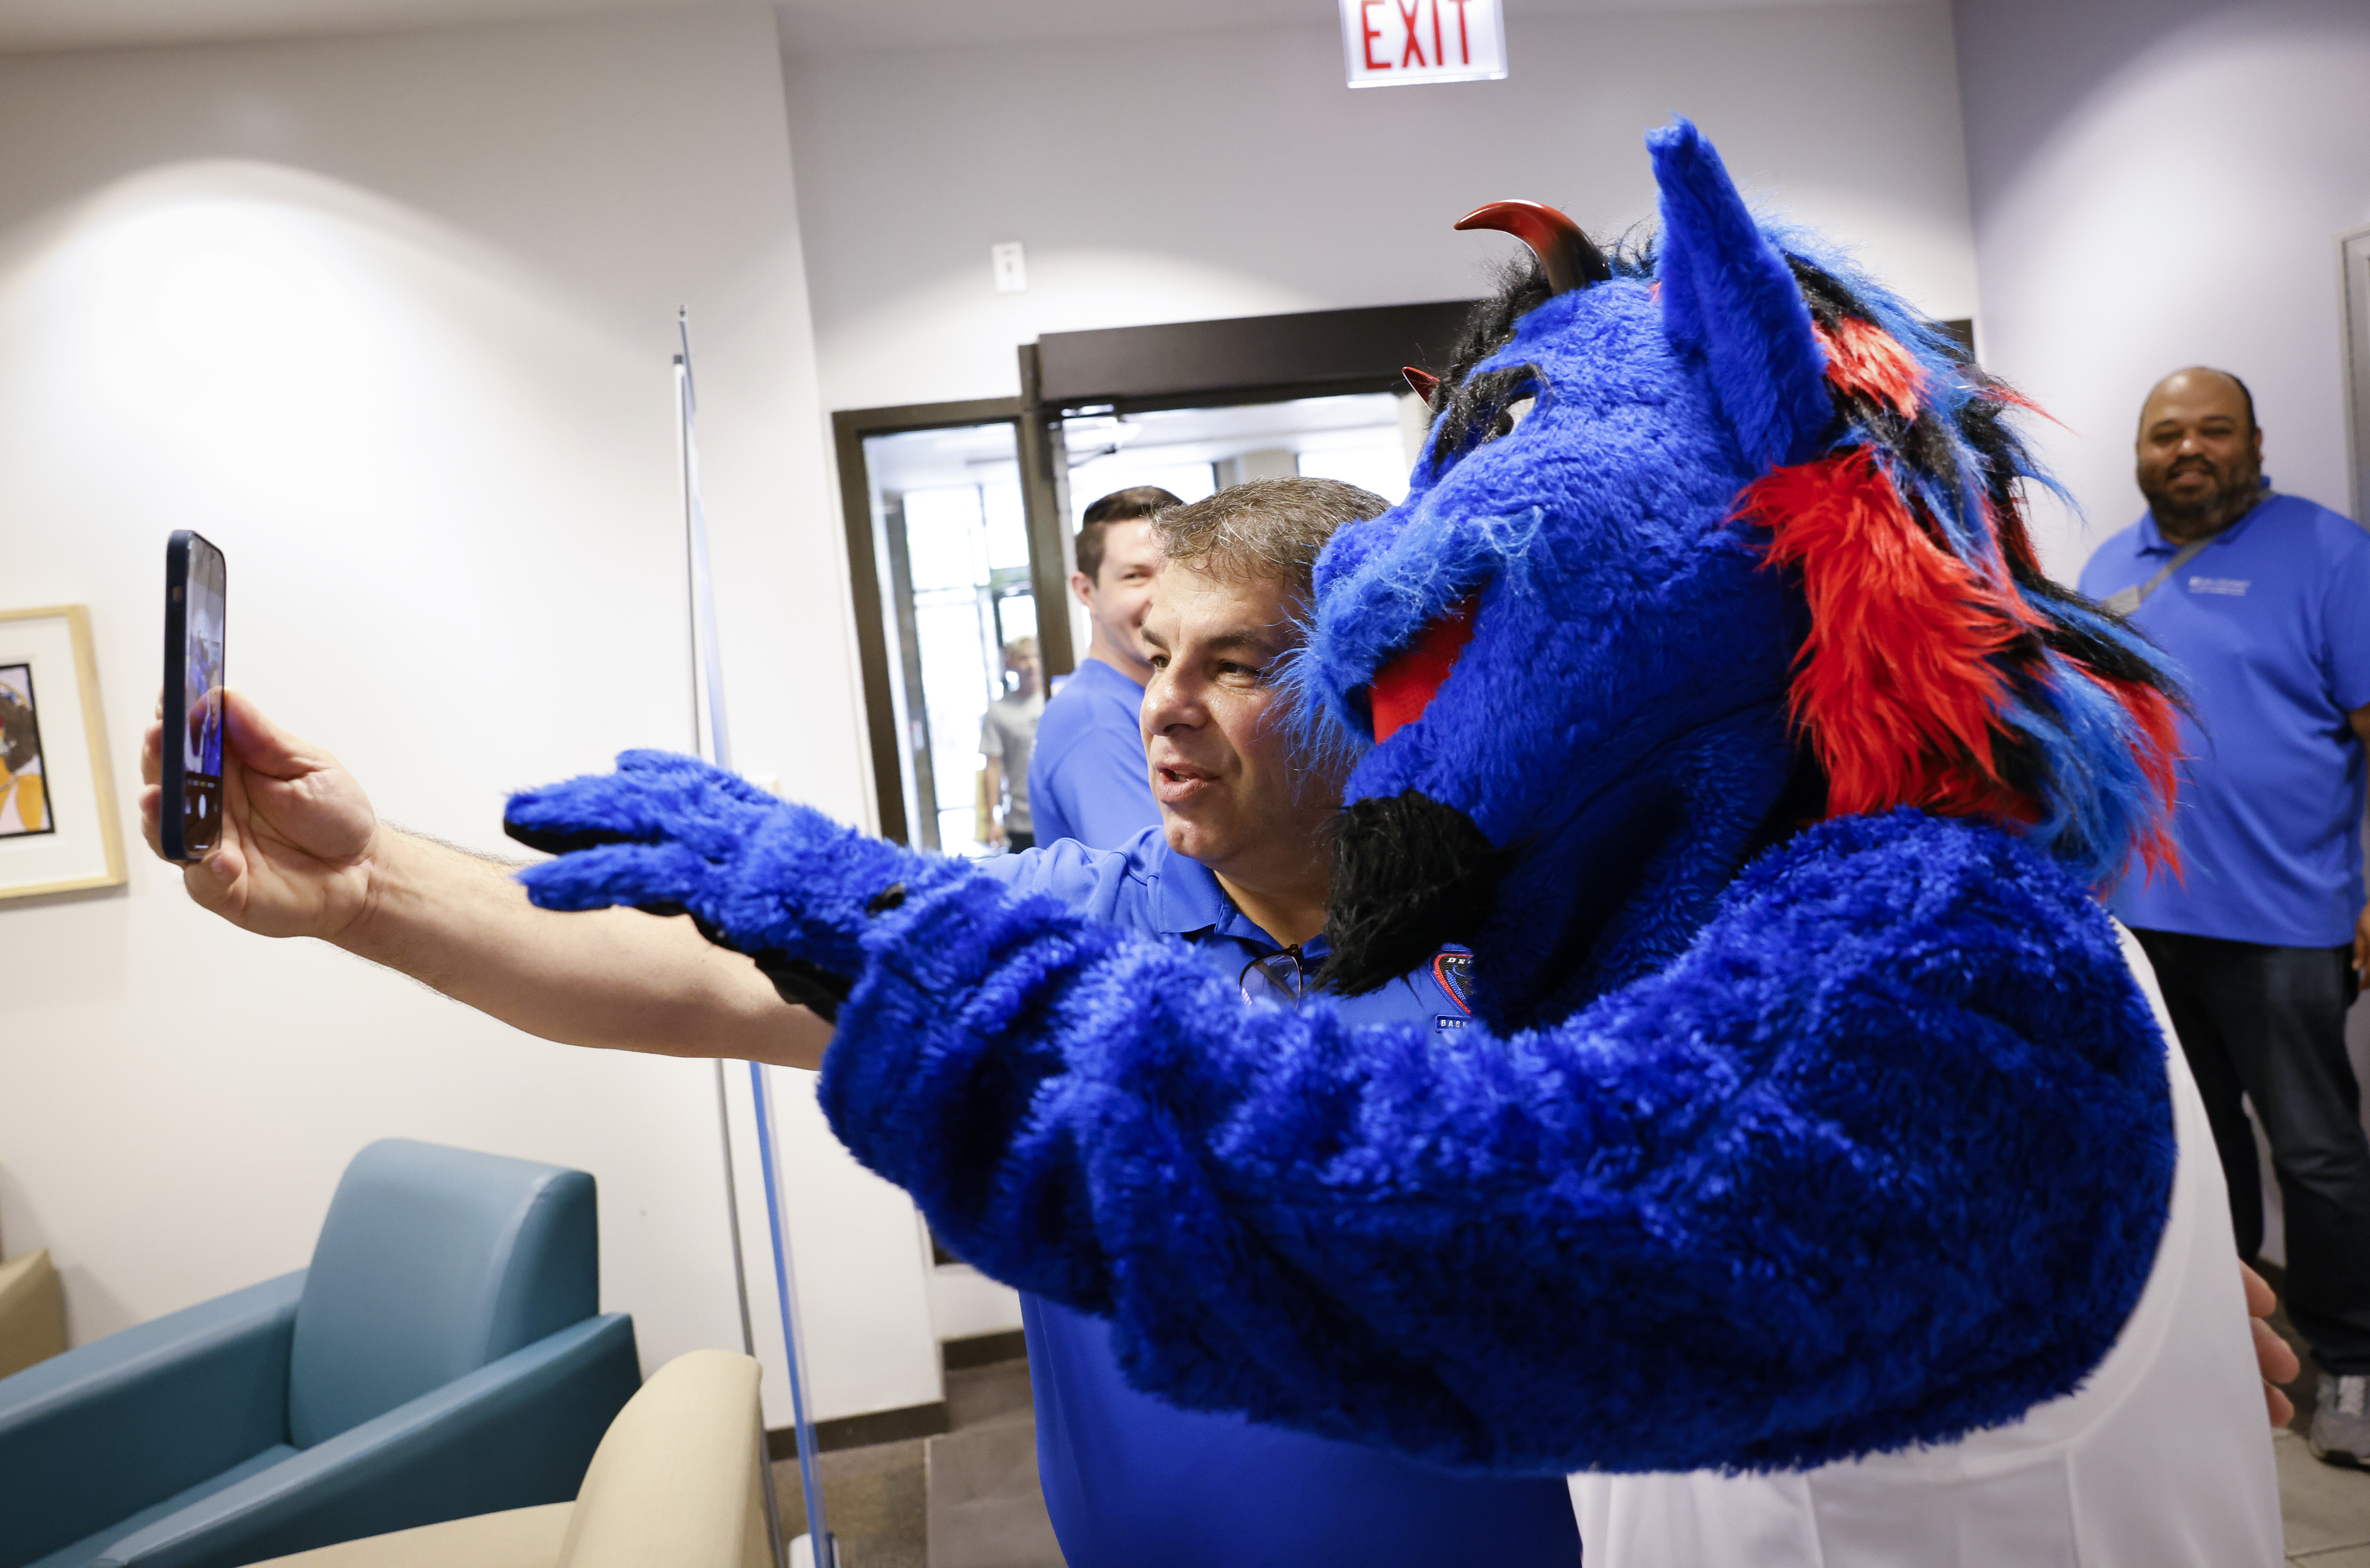 DePaul welcomes home students on Move-in Day